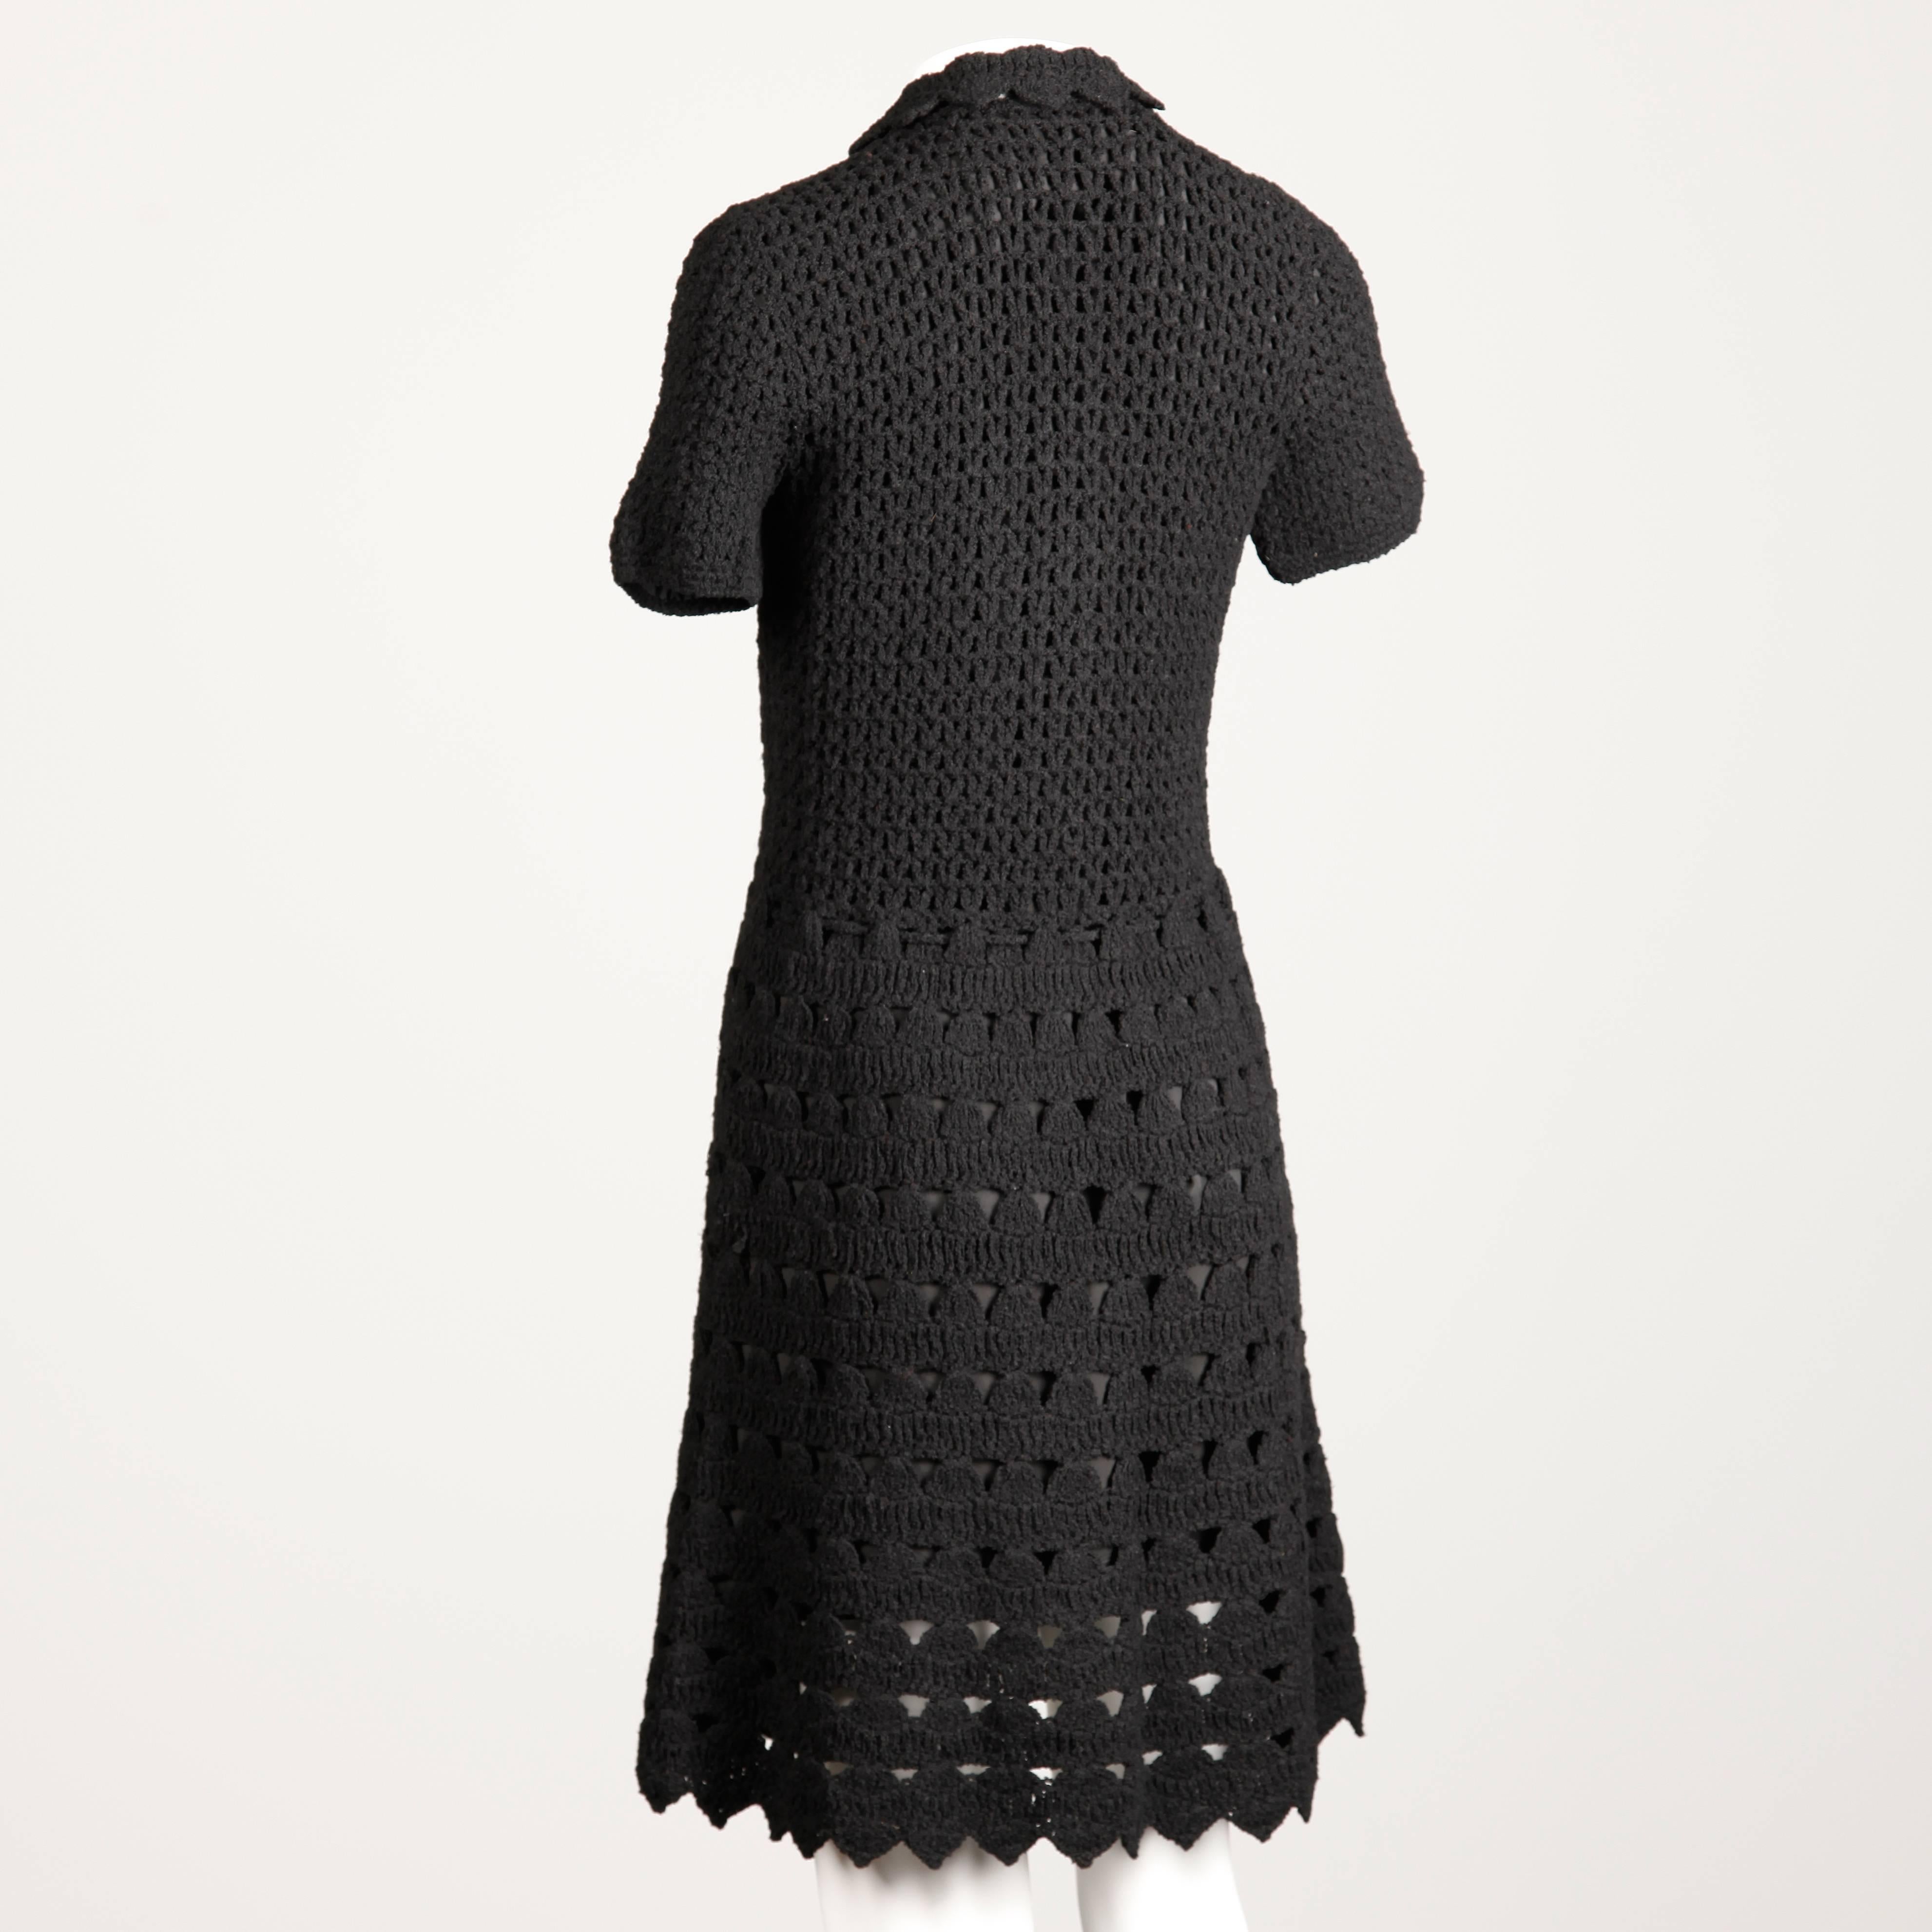 1960s Vintage Black Wool Hand Crochet Dress In Excellent Condition For Sale In Sparks, NV